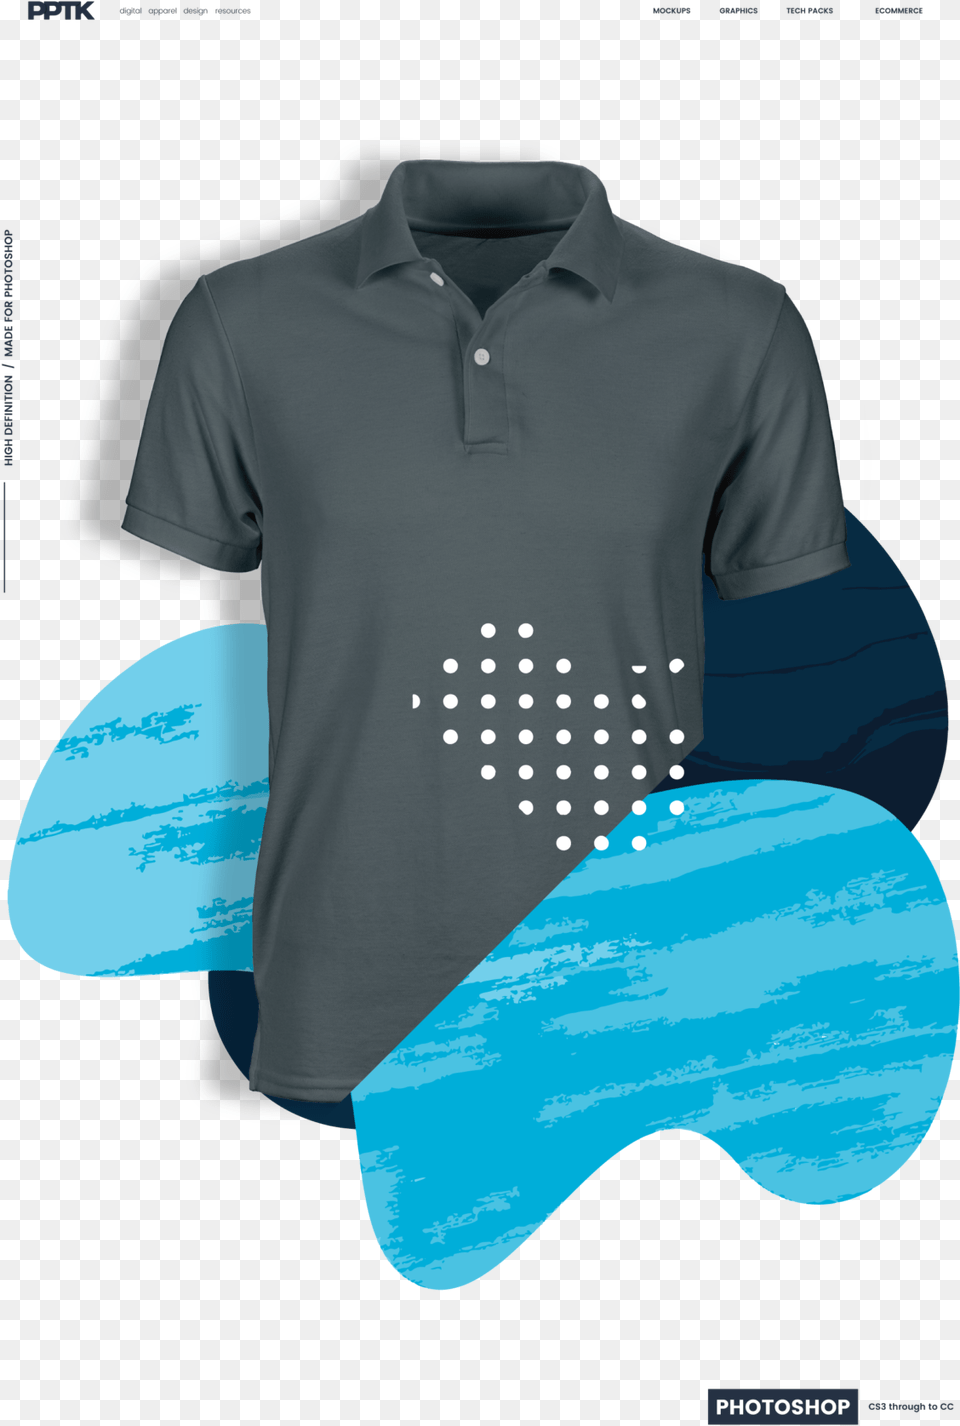 Ghosted Mens Polo Shirt Template Photoshop Hero Polo T Shirt Mockup Psd, Clothing, T-shirt, Sleeve, Long Sleeve Free Png Download